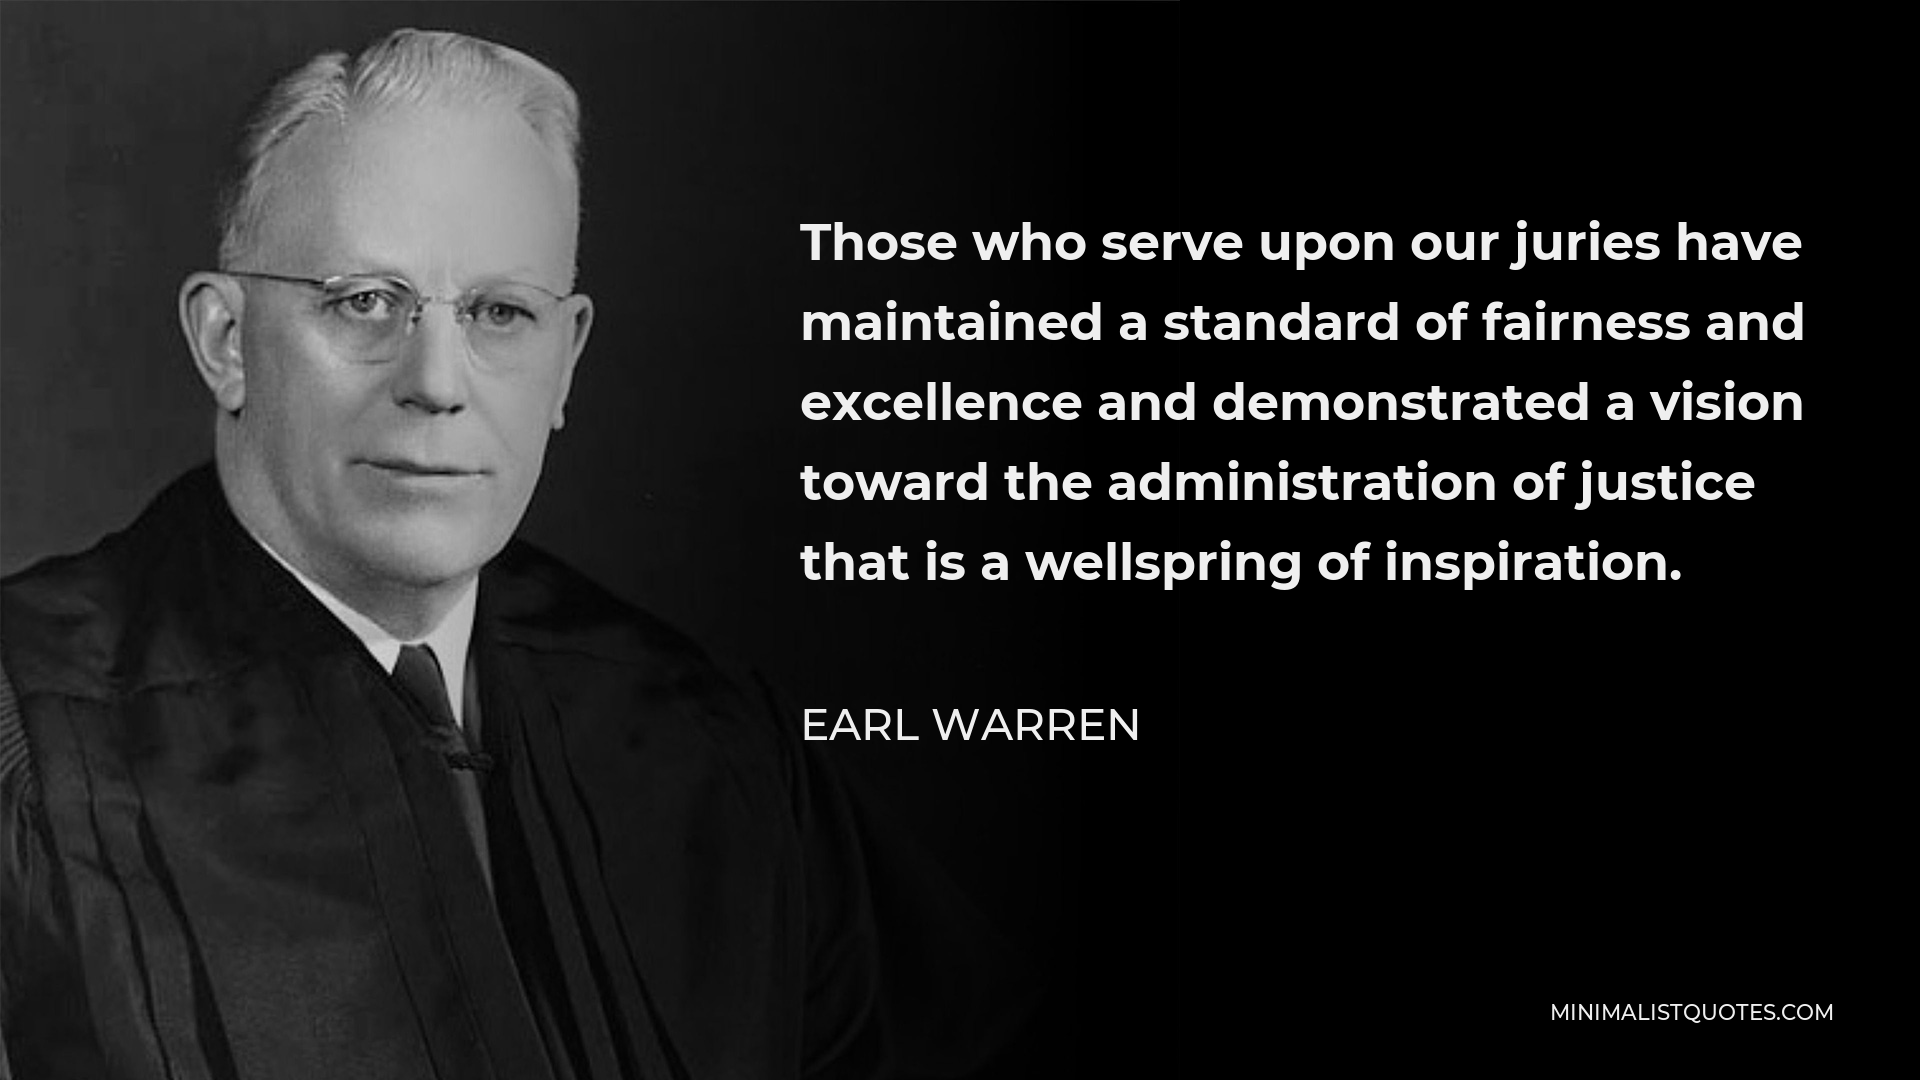 Earl Warren Quote - Those who serve upon our juries have maintained a standard of fairness and excellence and demonstrated a vision toward the administration of justice that is a wellspring of inspiration.